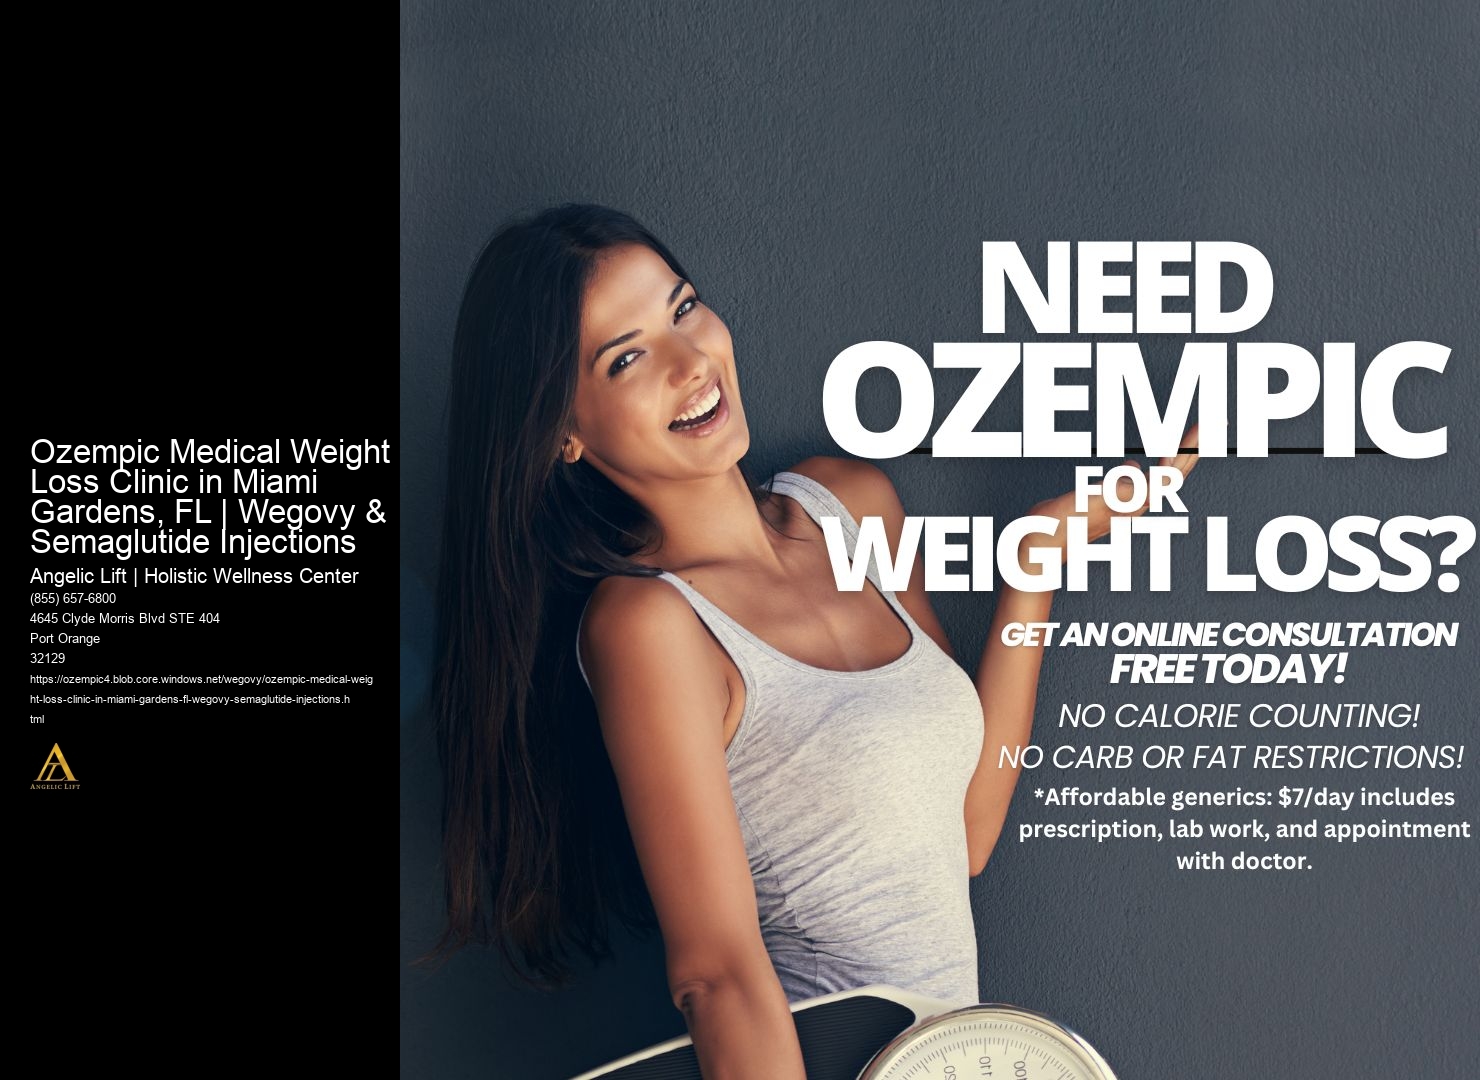 Ozempic Medical Weight Loss Clinic in Miami Gardens, FL | Wegovy & Semaglutide Injections